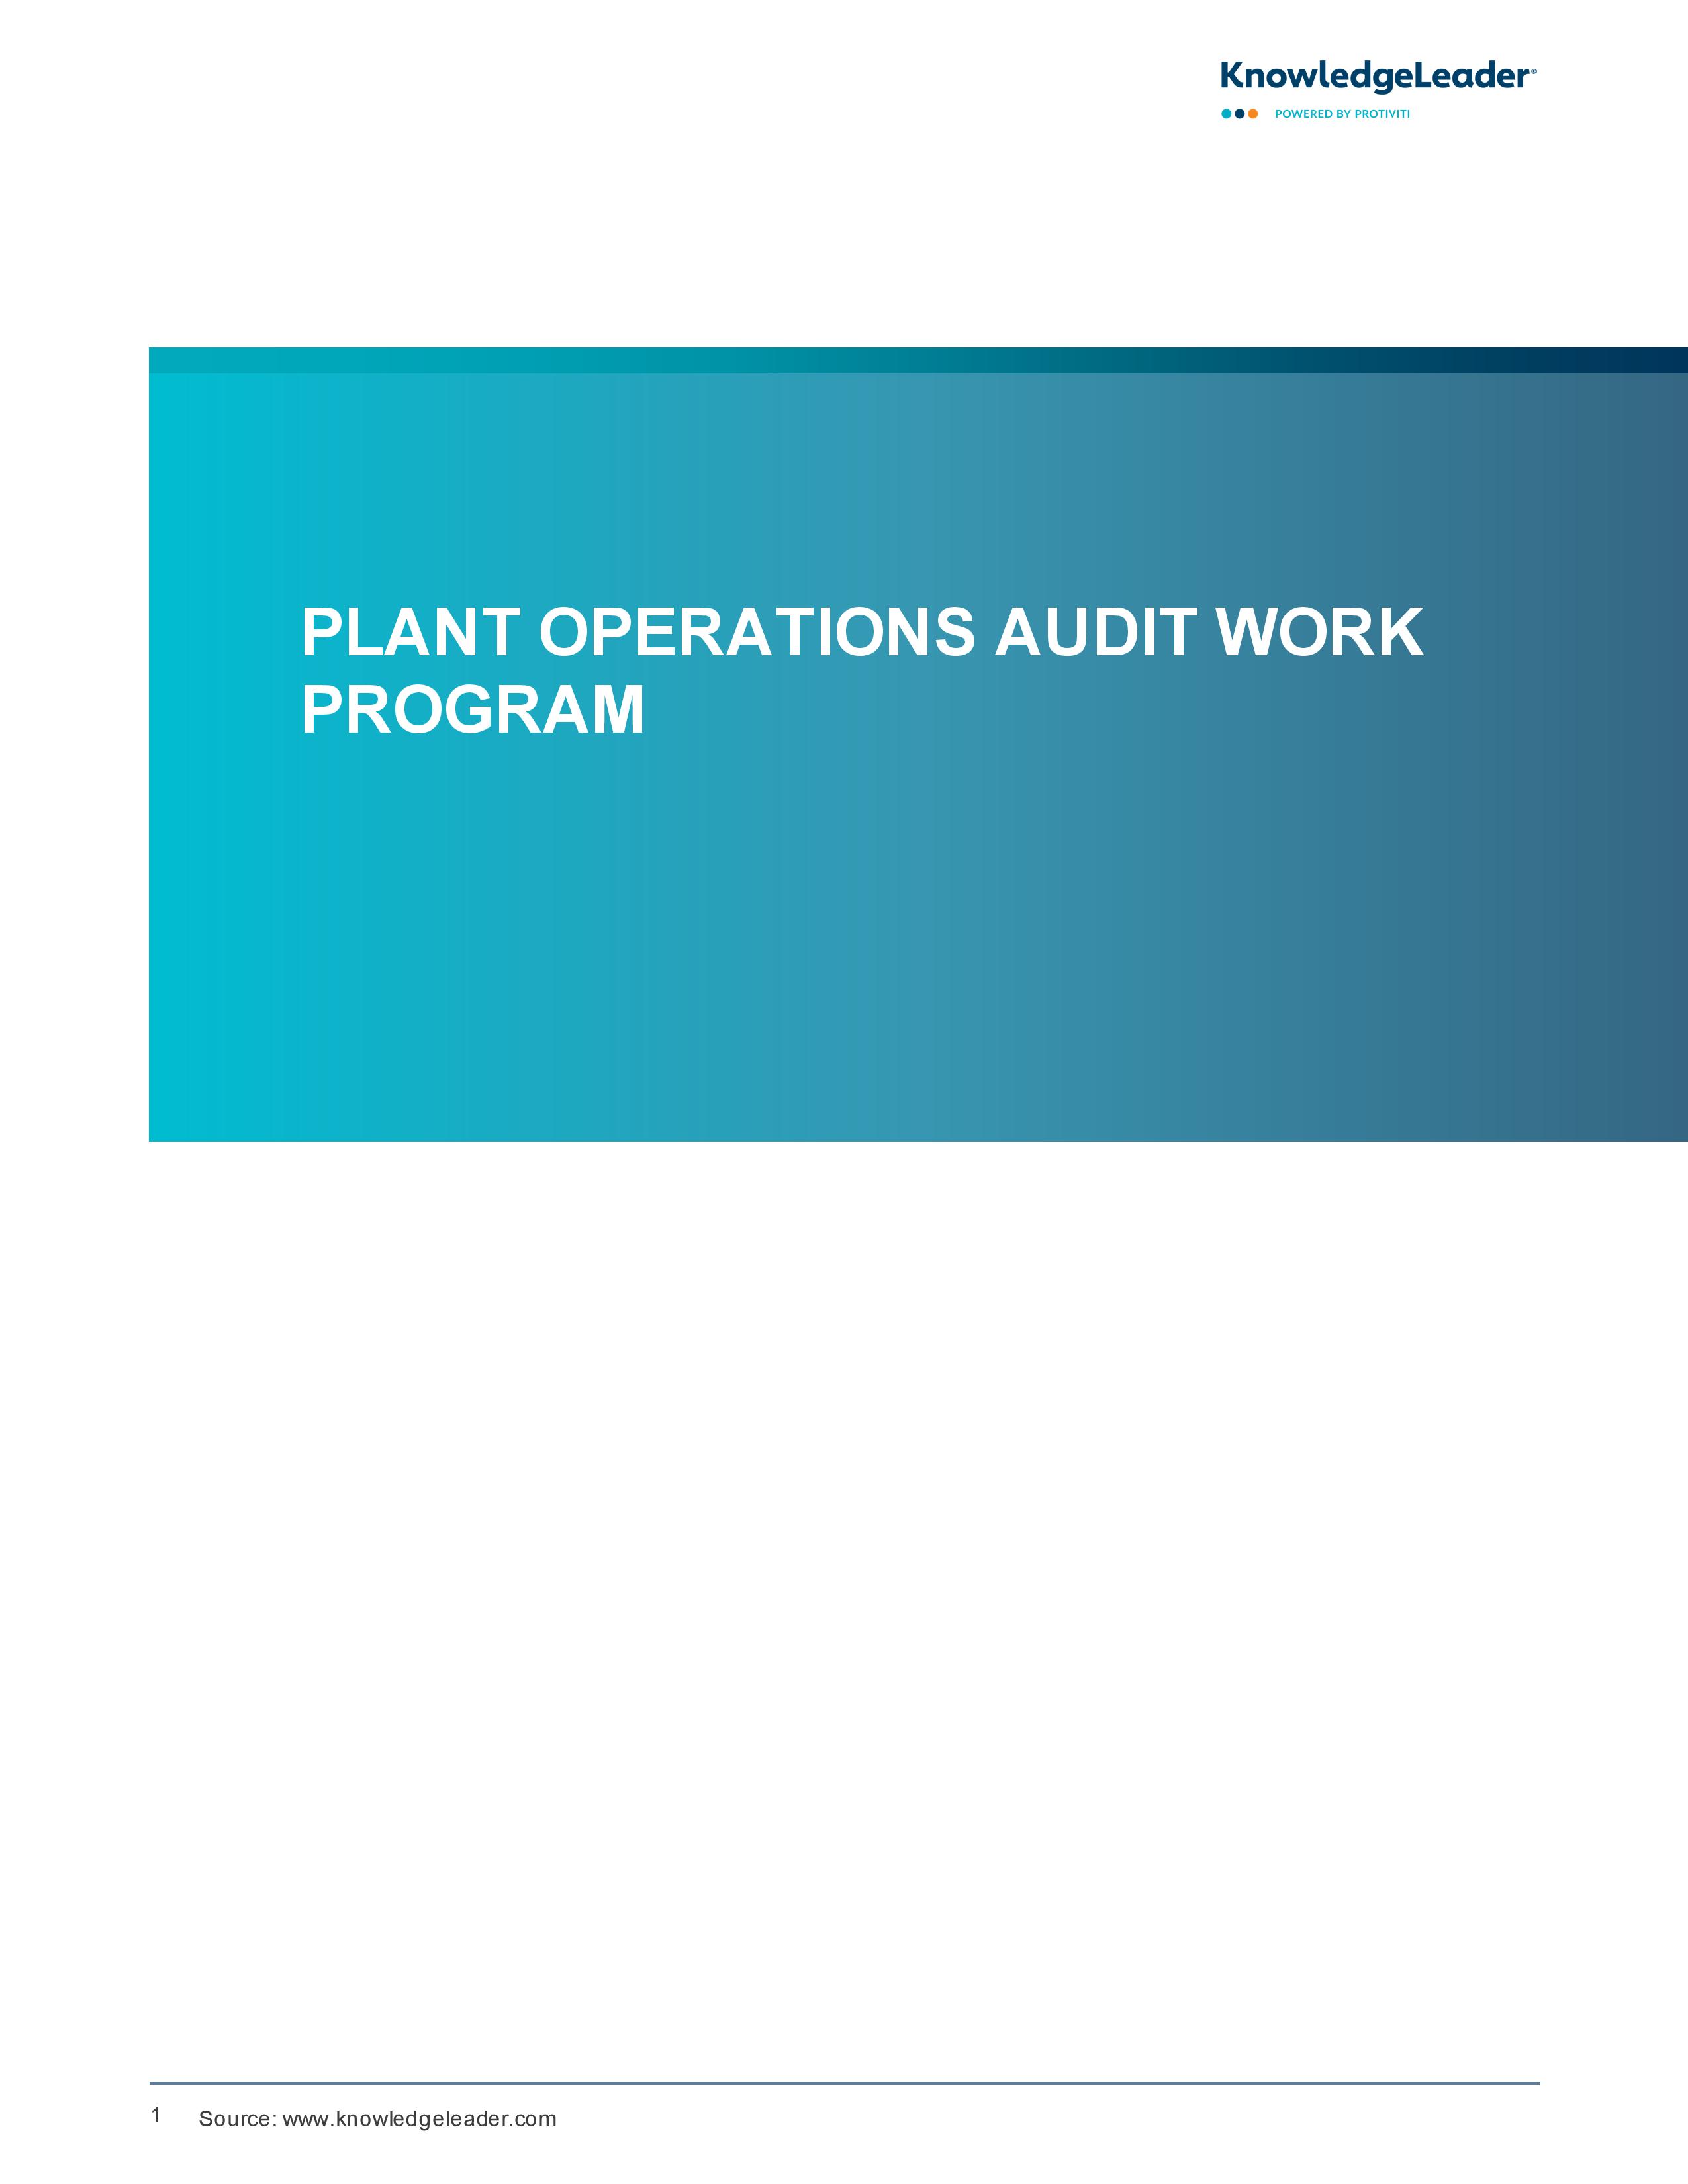 screenshot of the first page of Plant Operations Audit Work Program